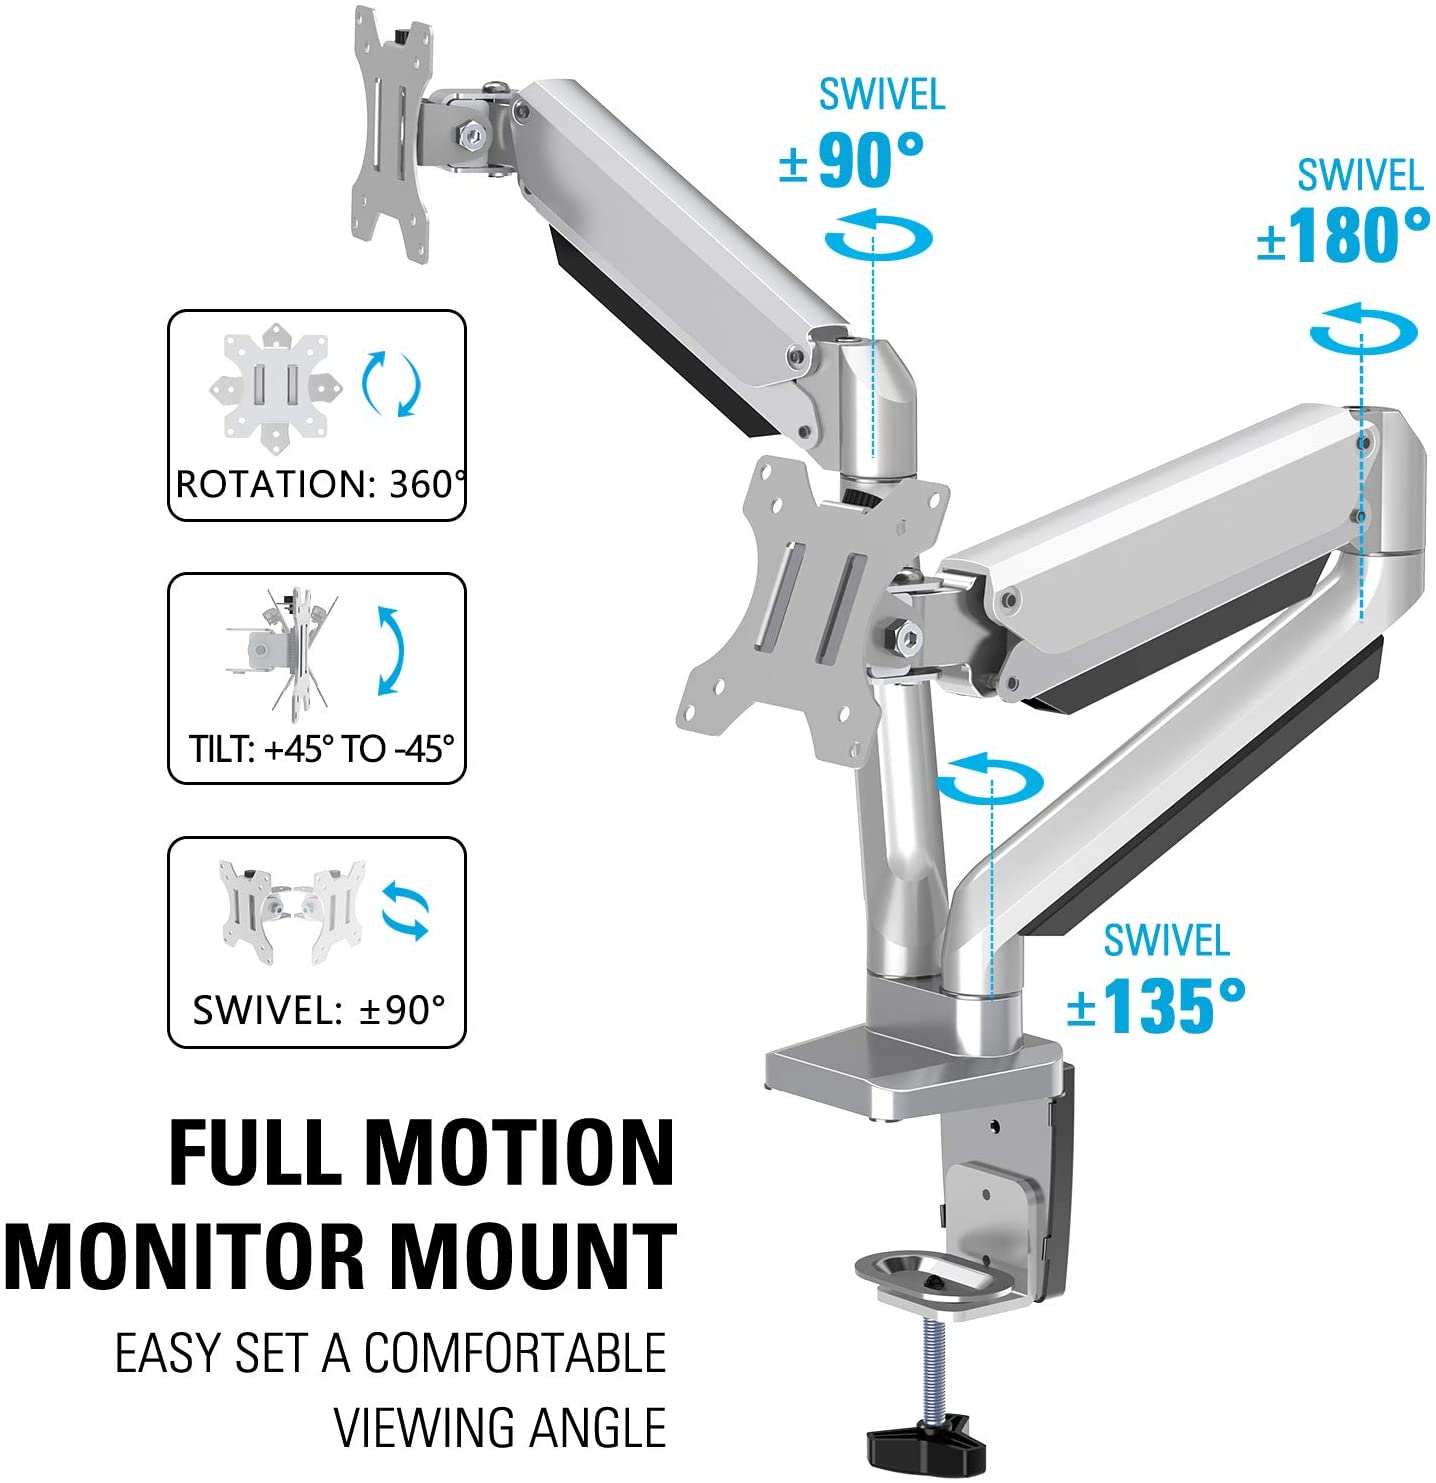 fully adjustable monitor arm